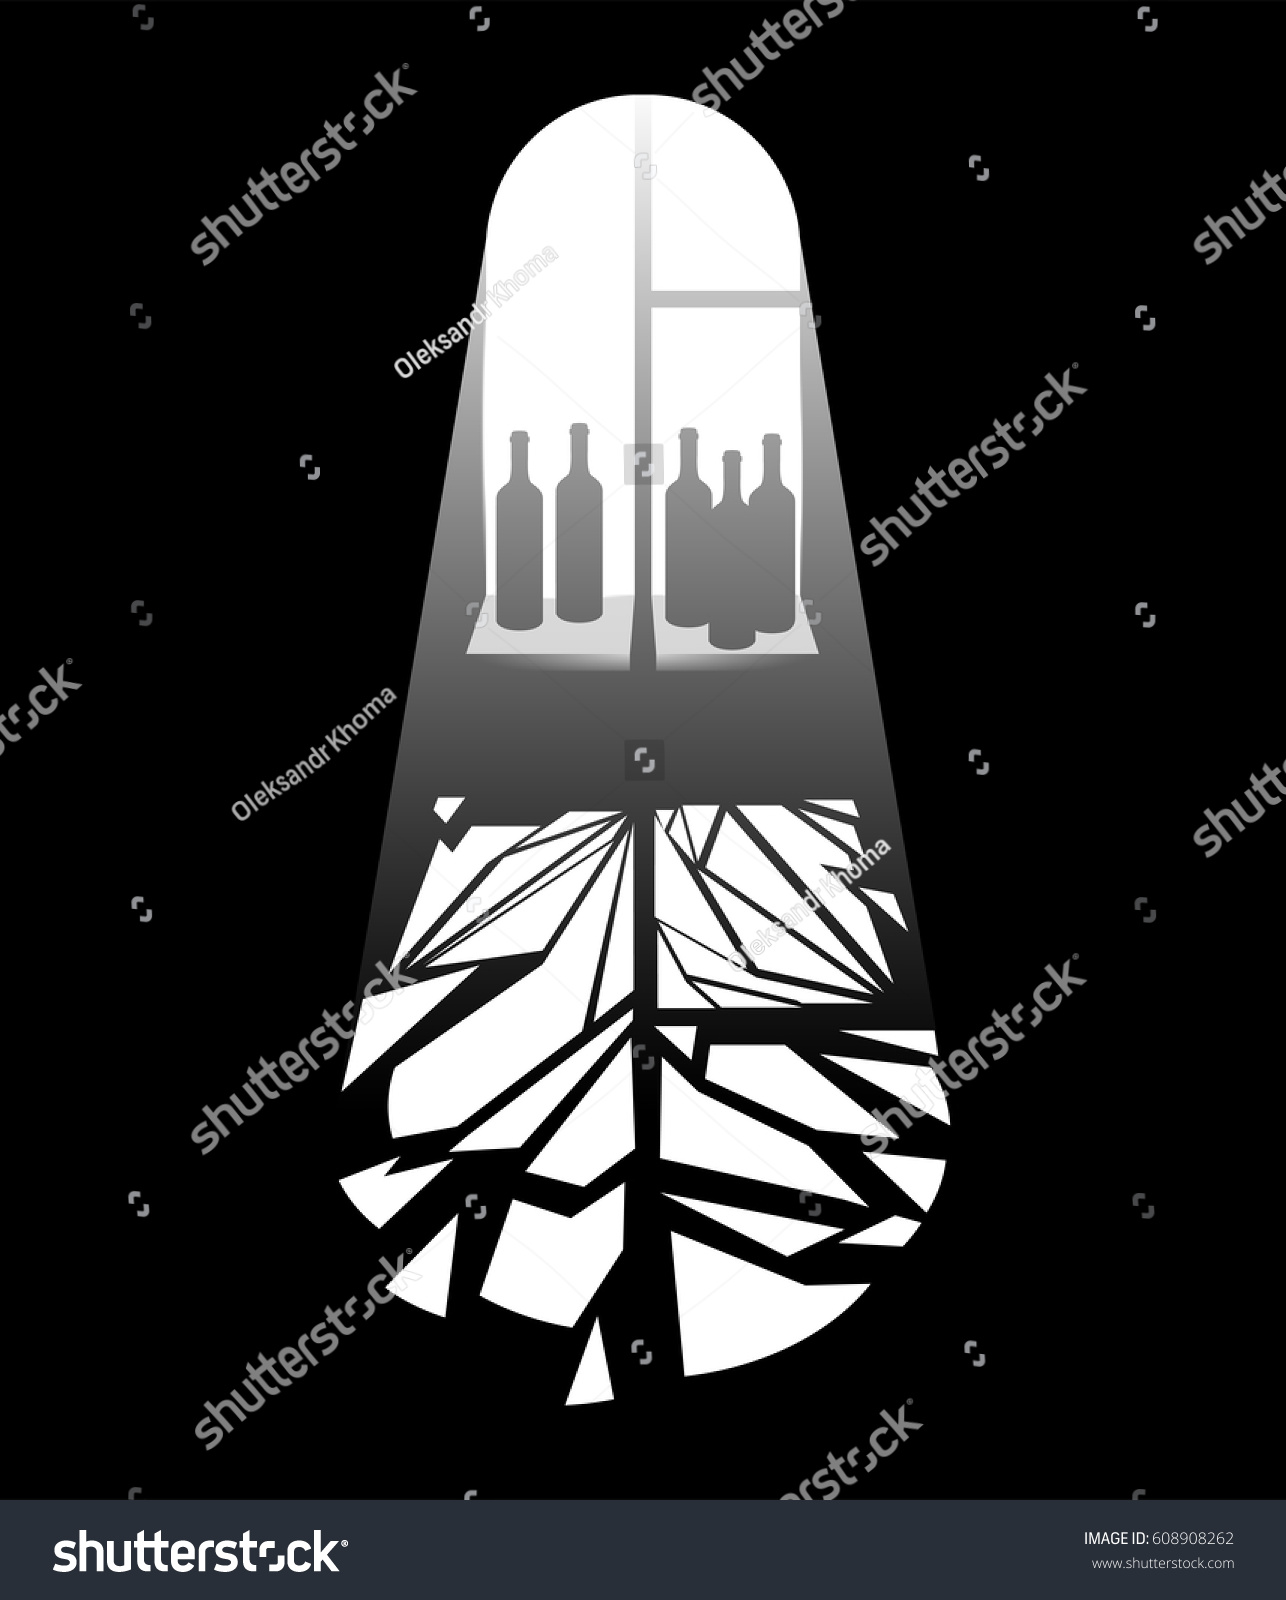 SVG of Alcohol addiction social issue, minimalist concept. Sunlight shines through window while several alcohol bottles standing on a windowsill. Broken lighted area symbolizing alcoholics life perspectives. svg